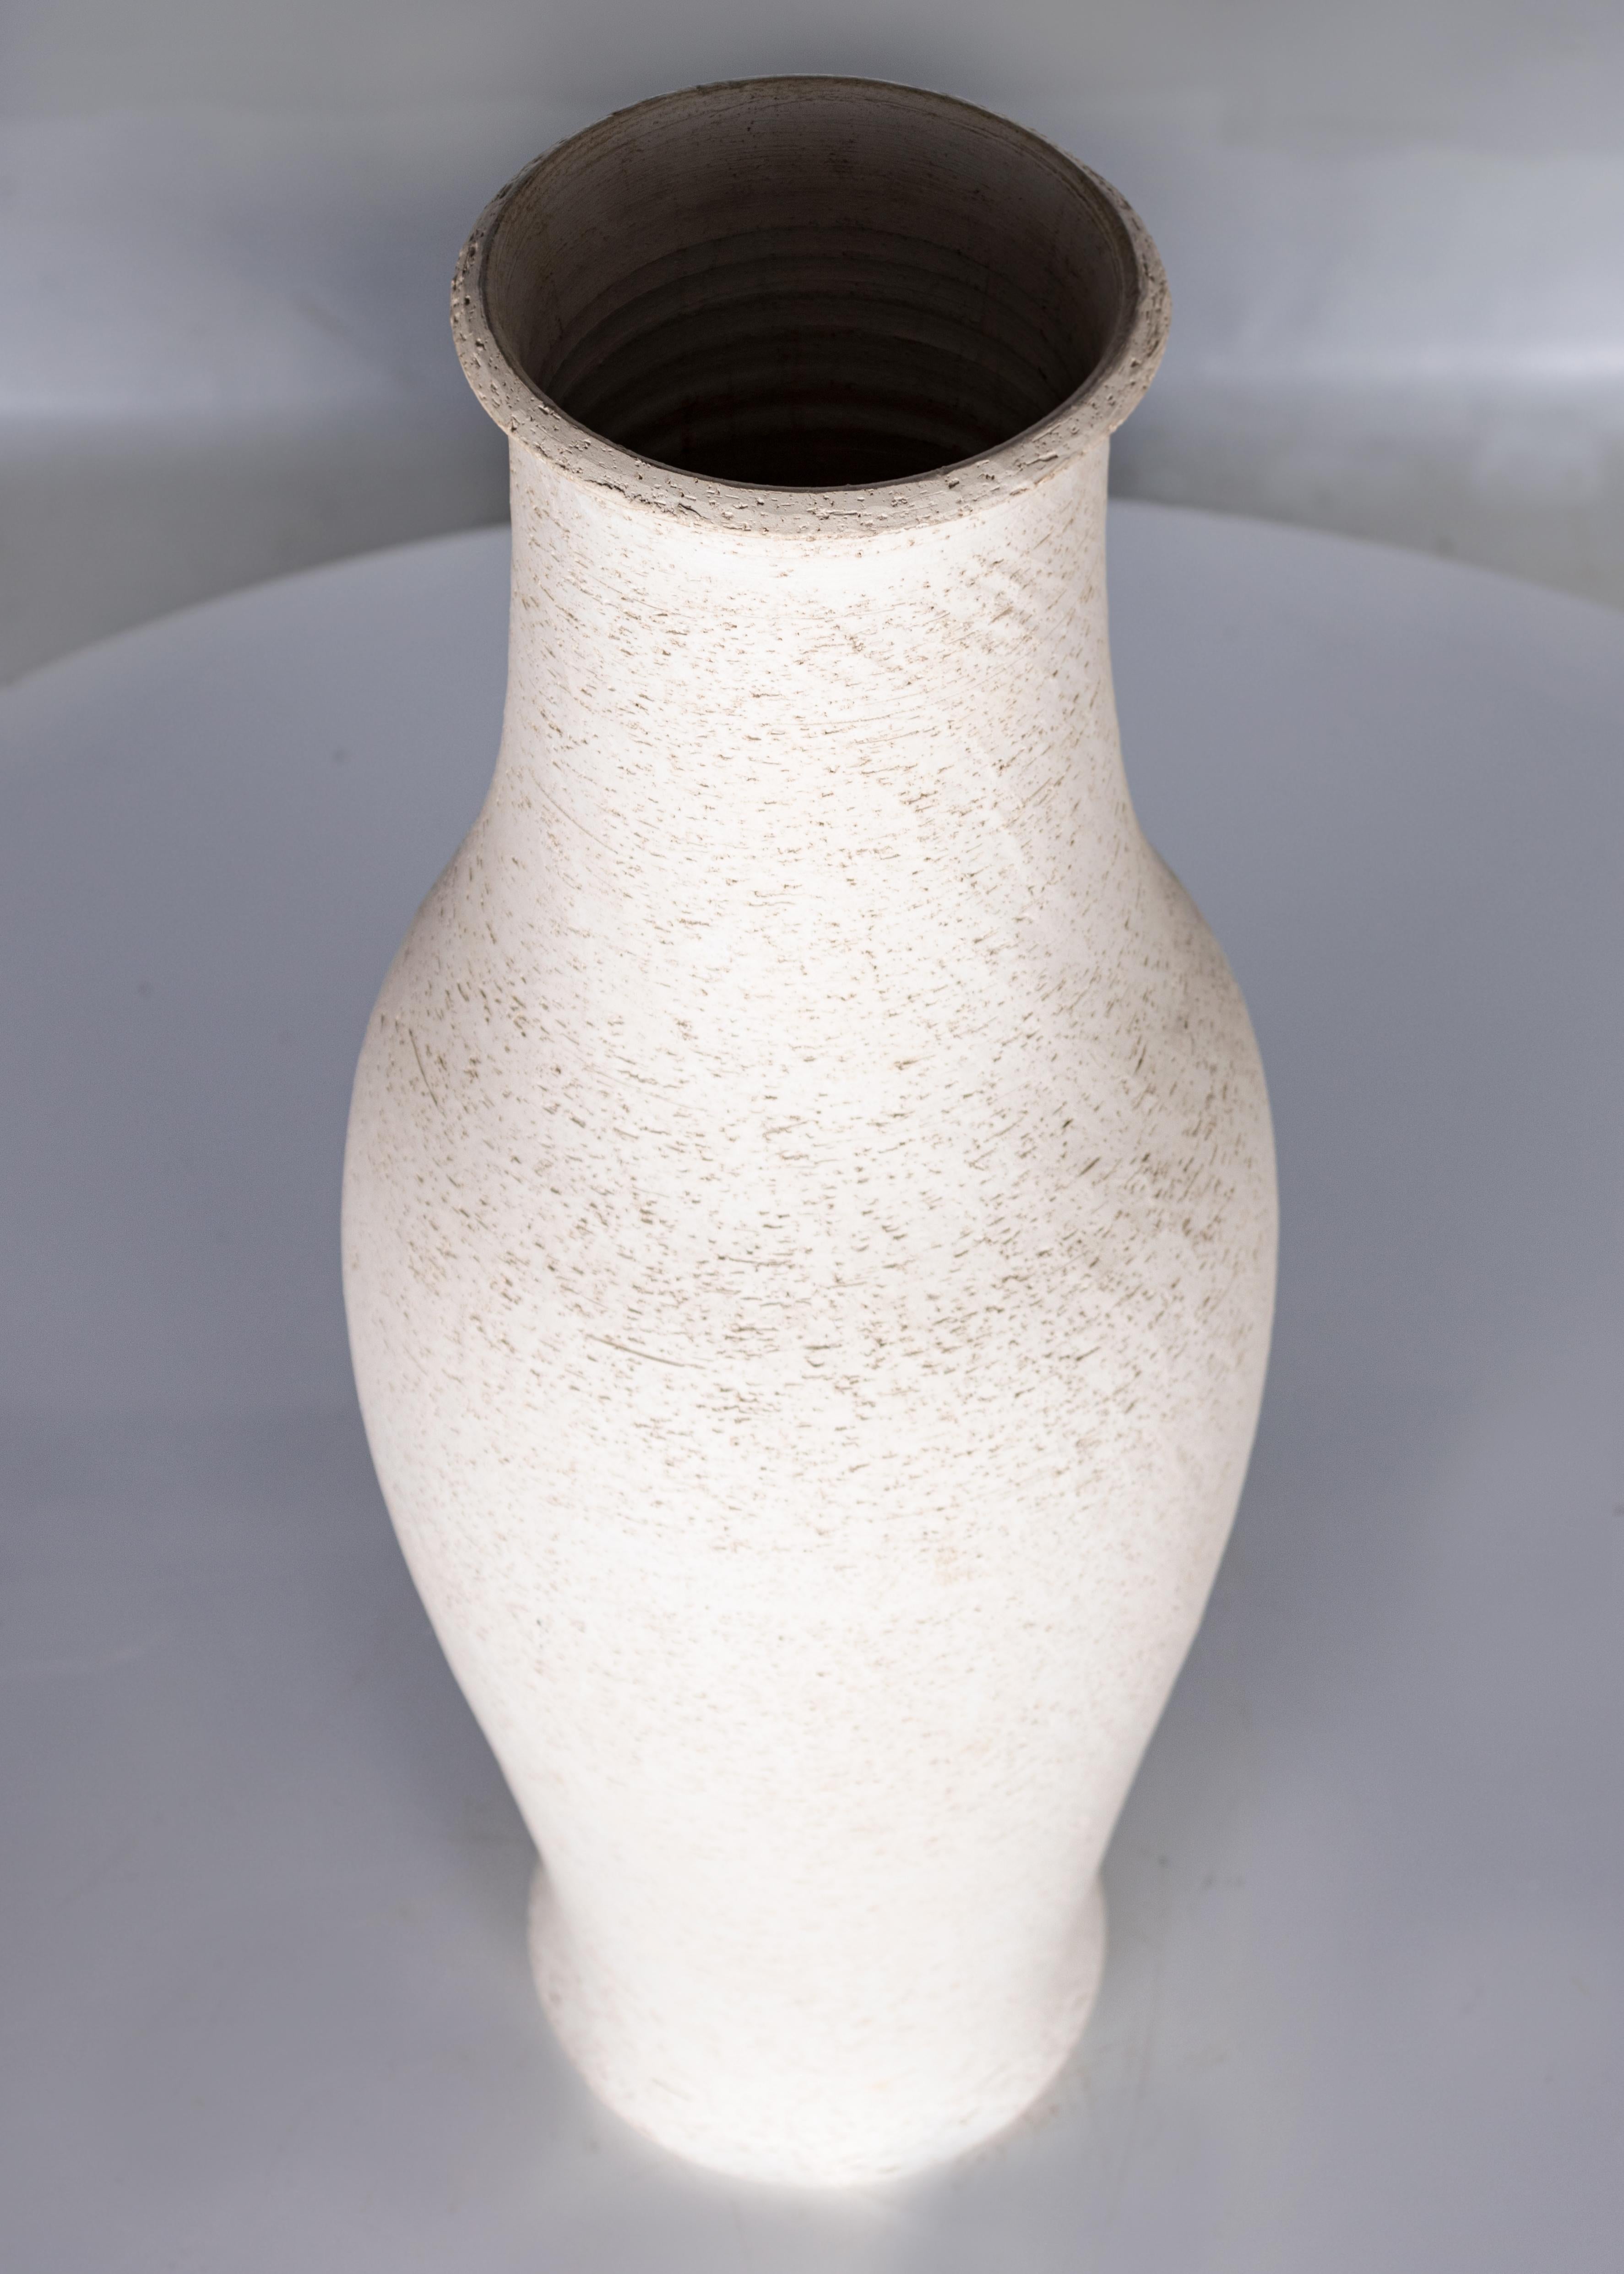 French bisque clay vase.

Piece from our one of a kind Le Monde collection. 

